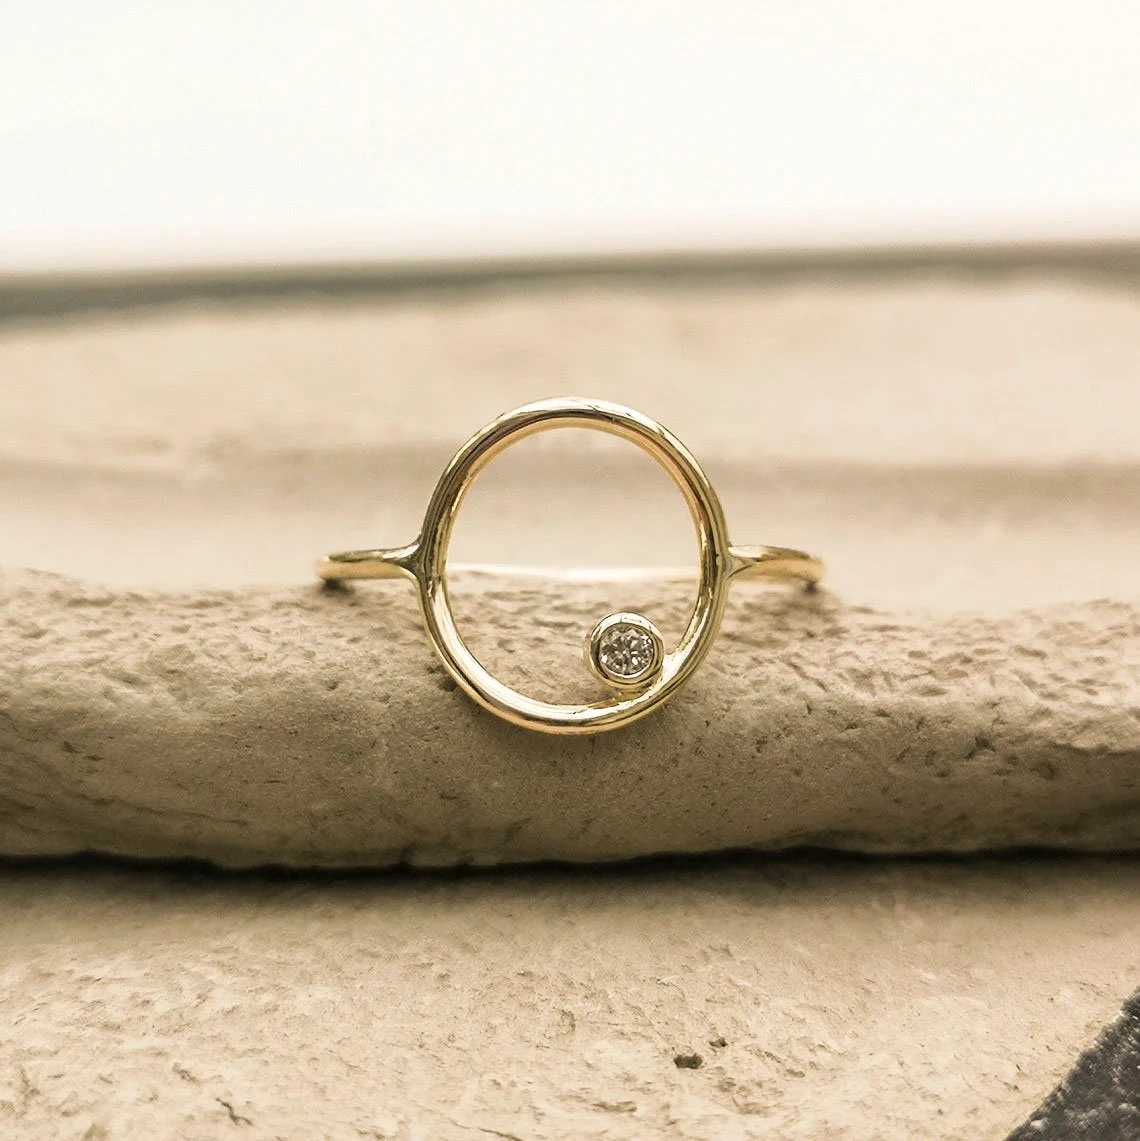 10K Solid Gold Round Tiny Crystal Karma Thin Ring Handmade Stacking Modernist Dainty Ring Minimalist Geometric Circle Unique Statement Ring-11440324